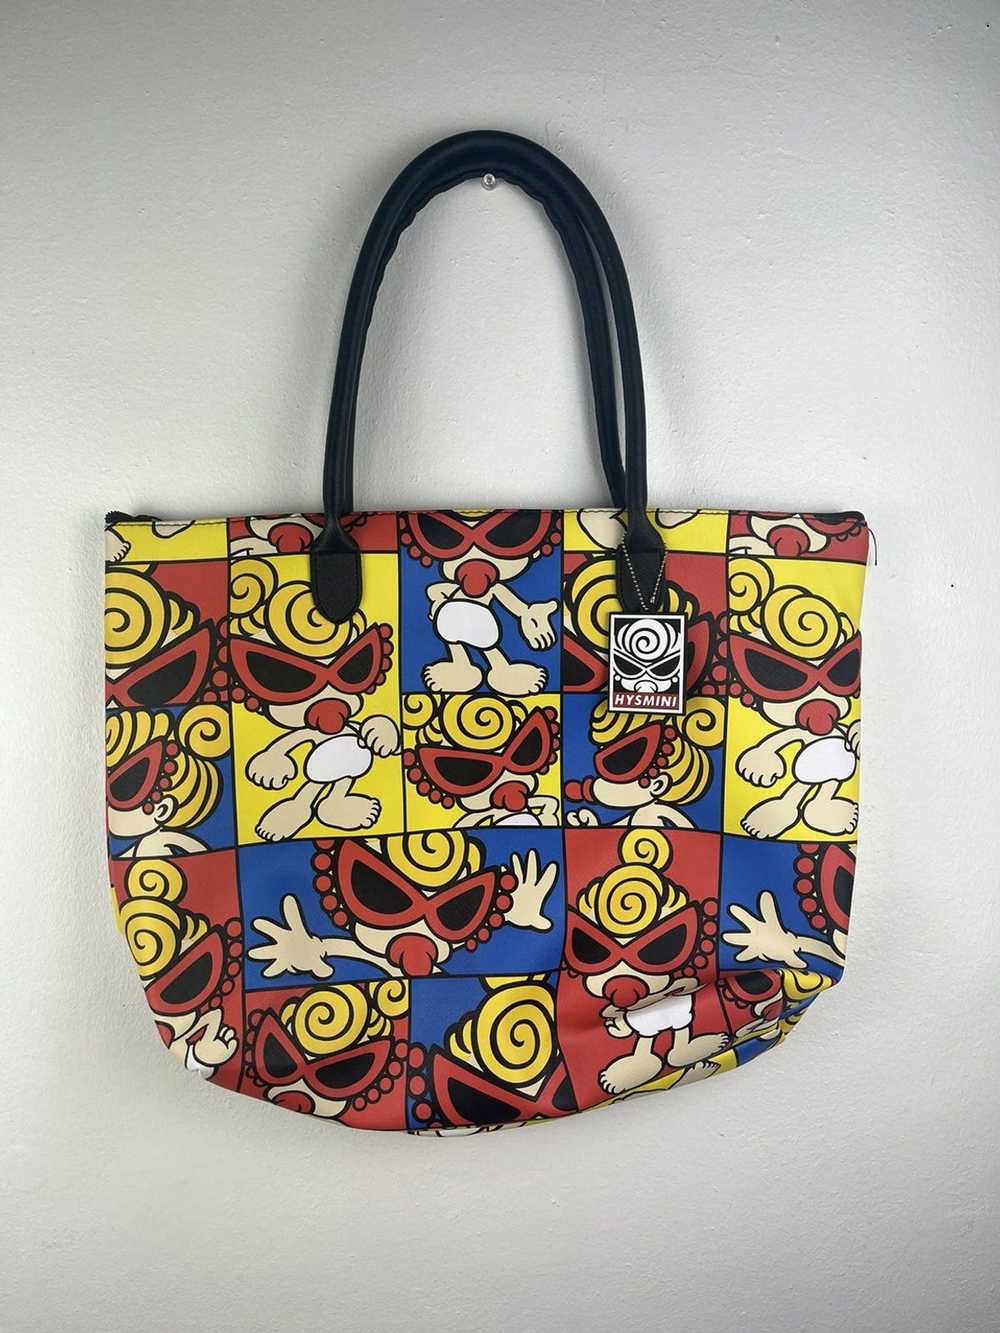 Hysteric Glamour Hysteric Glamour Tote - image 1